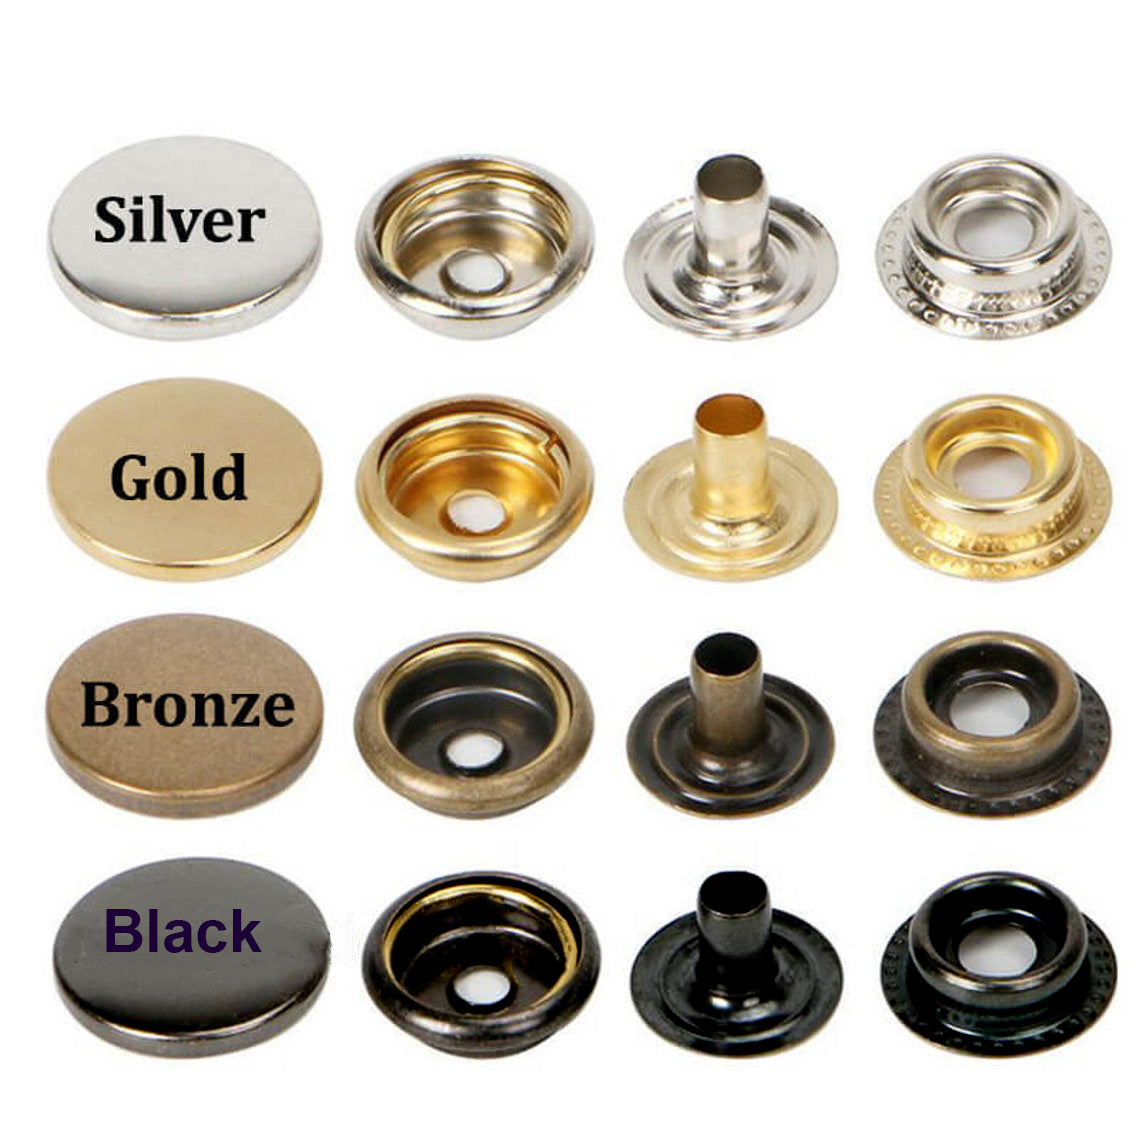 12.5 mm System 54 Round Metal Snap Buttons 720 Sets / Bronze